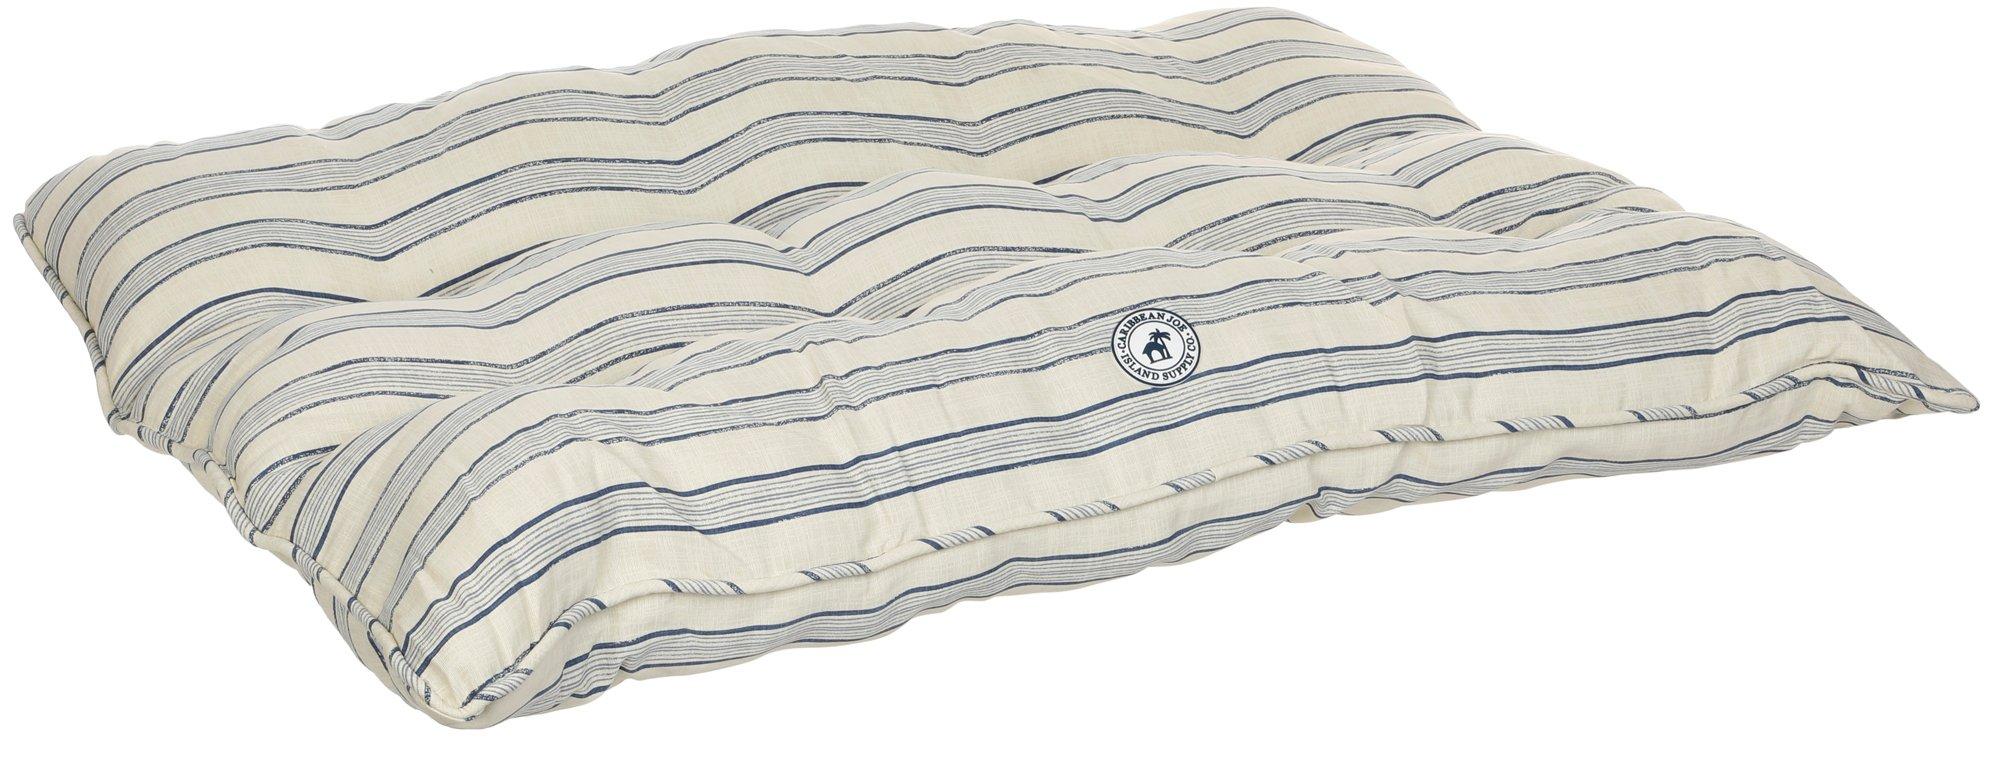 Striped Pet Pillow Bed